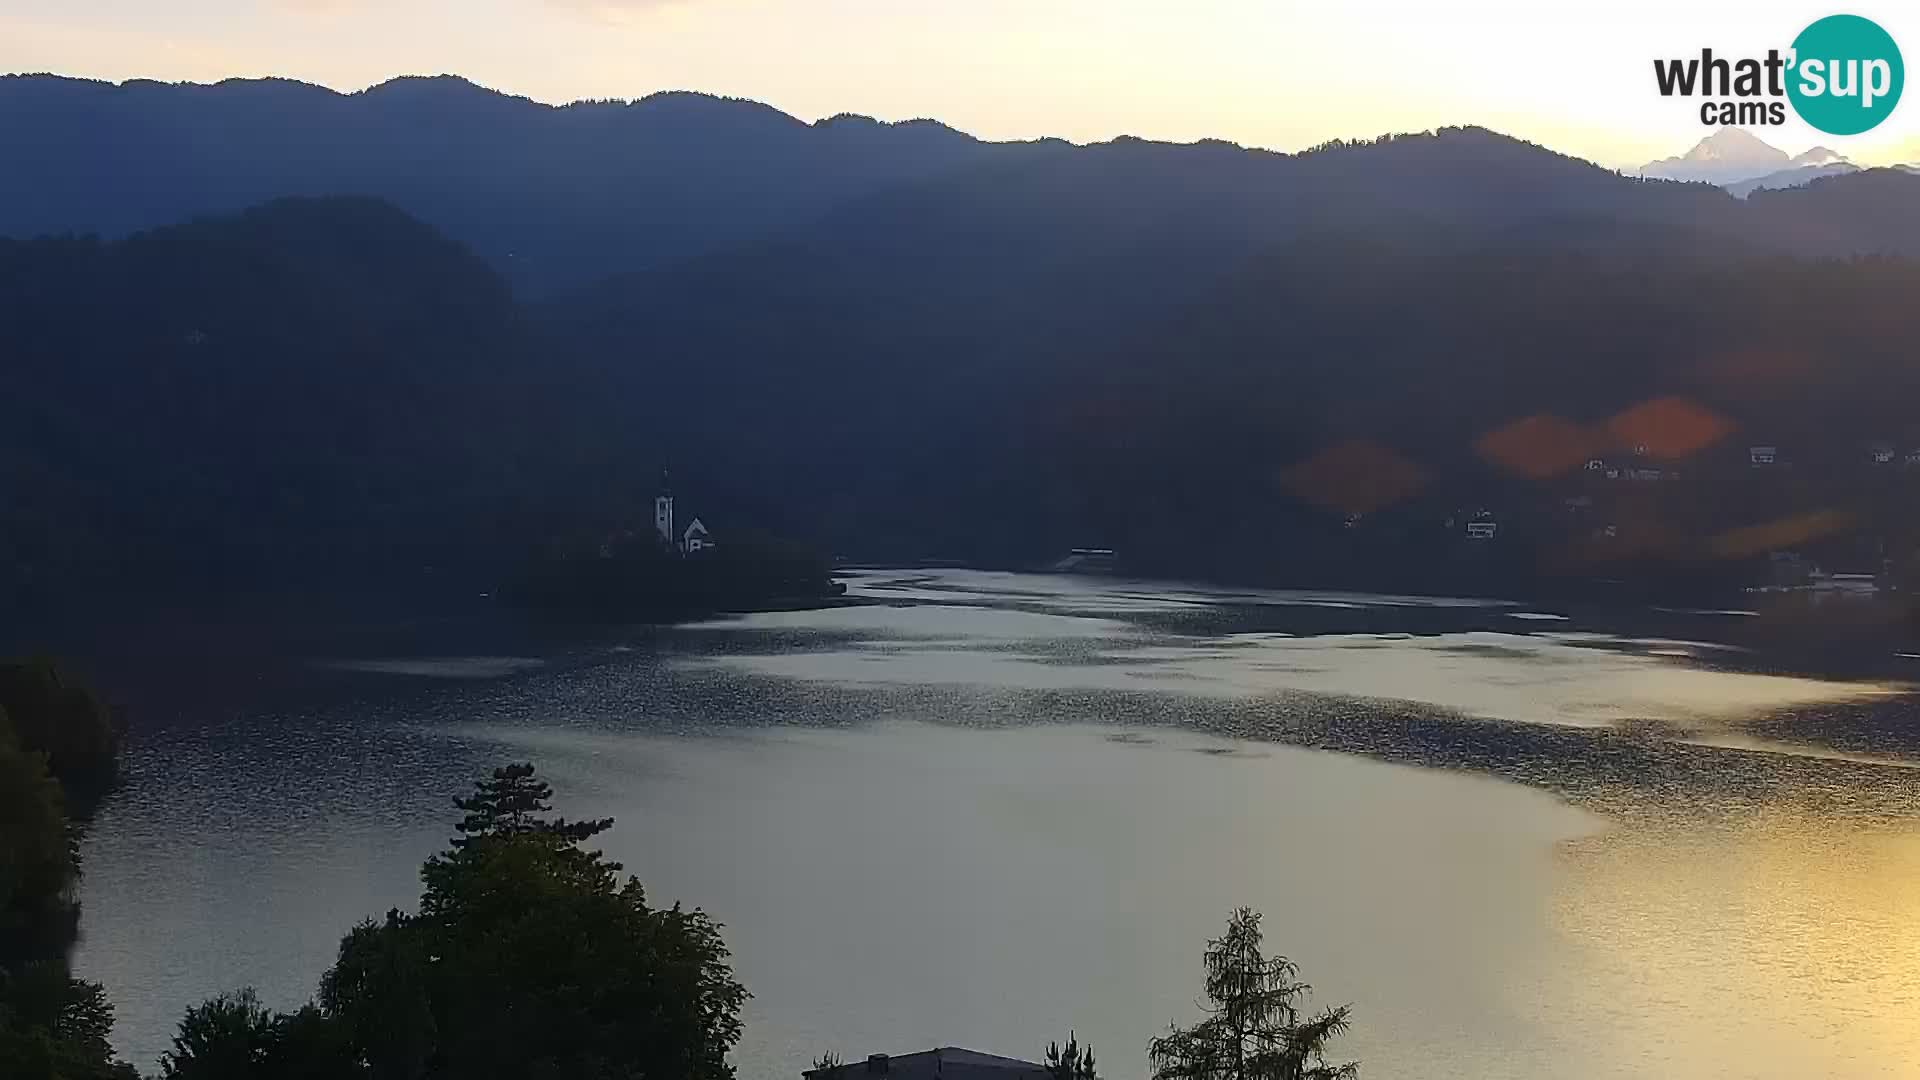 Panorama des Sees Bled